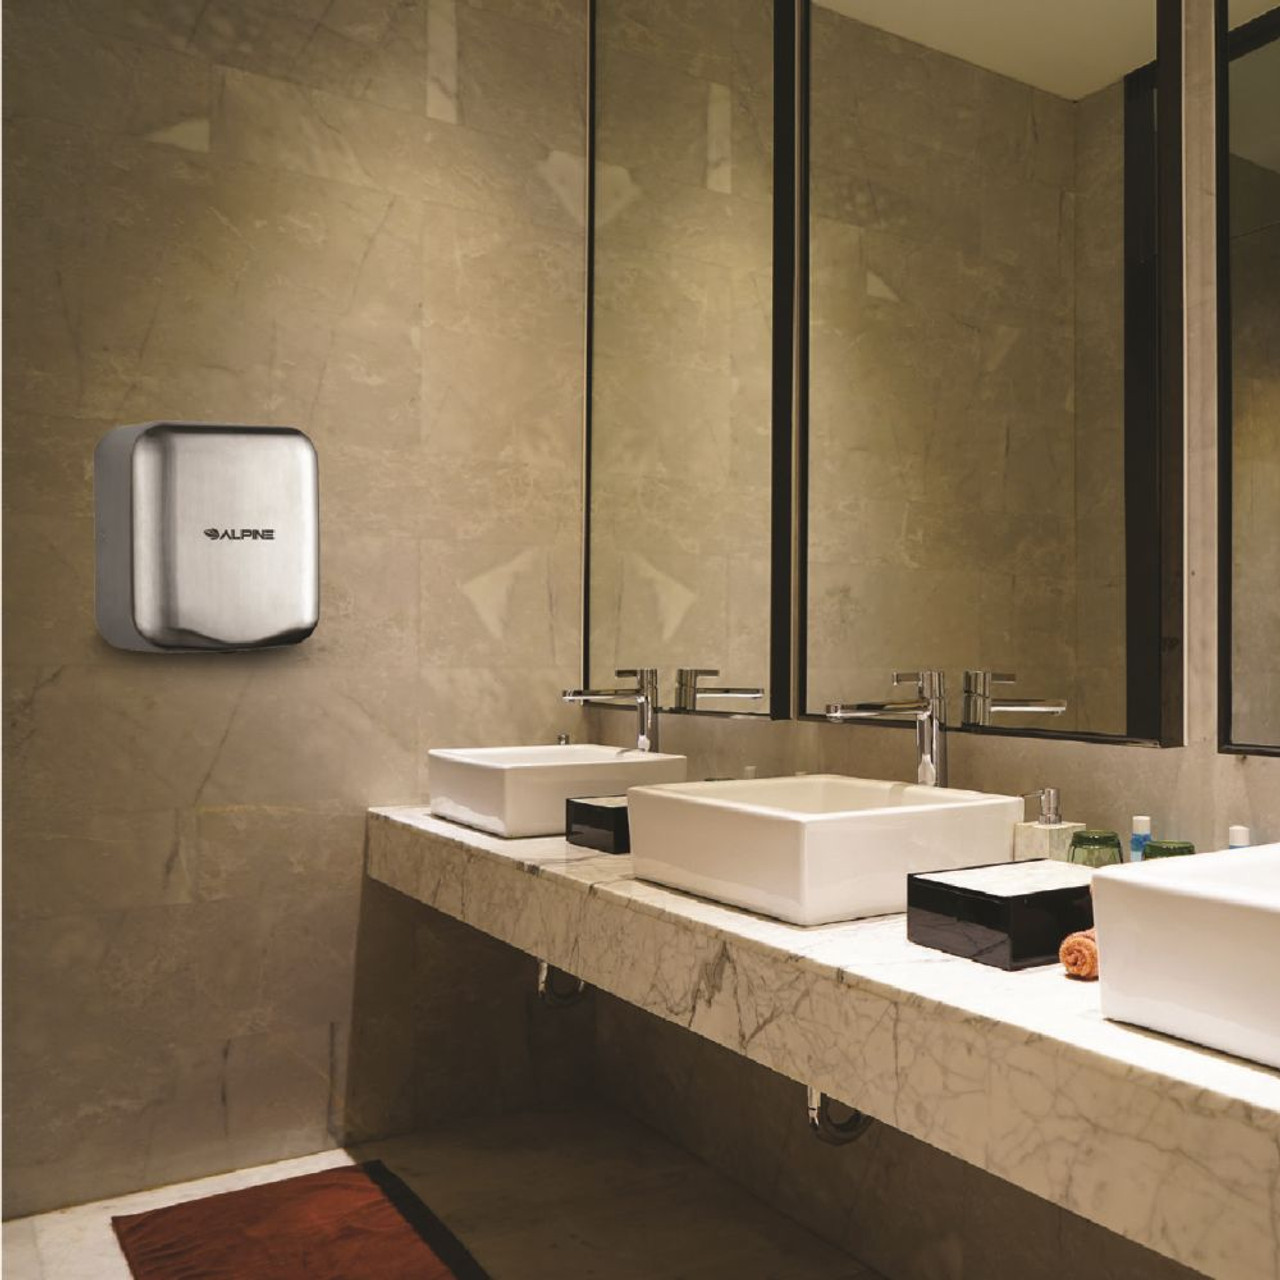 The Brushed Stainless Steel Hemlock Hand Dryer will make your restroom look more upscale.